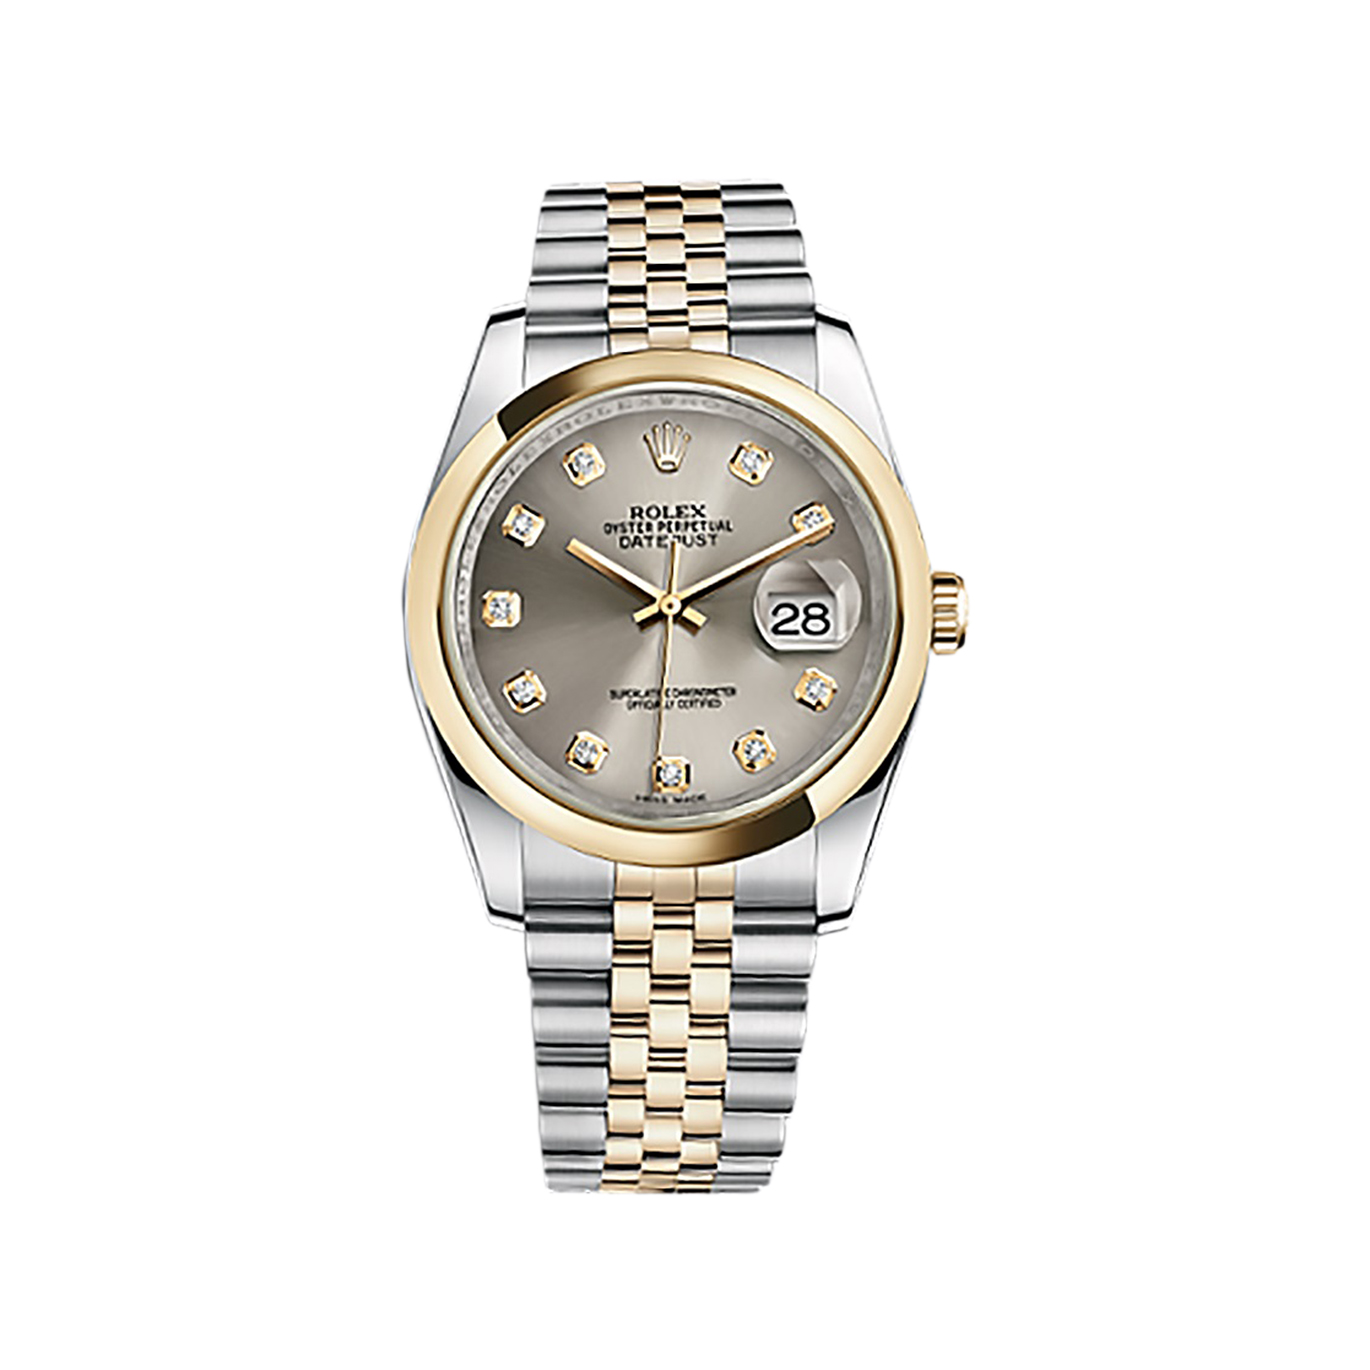 Datejust 36 116203 Gold & Stainless Steel Watch (Steel Set with Diamonds)